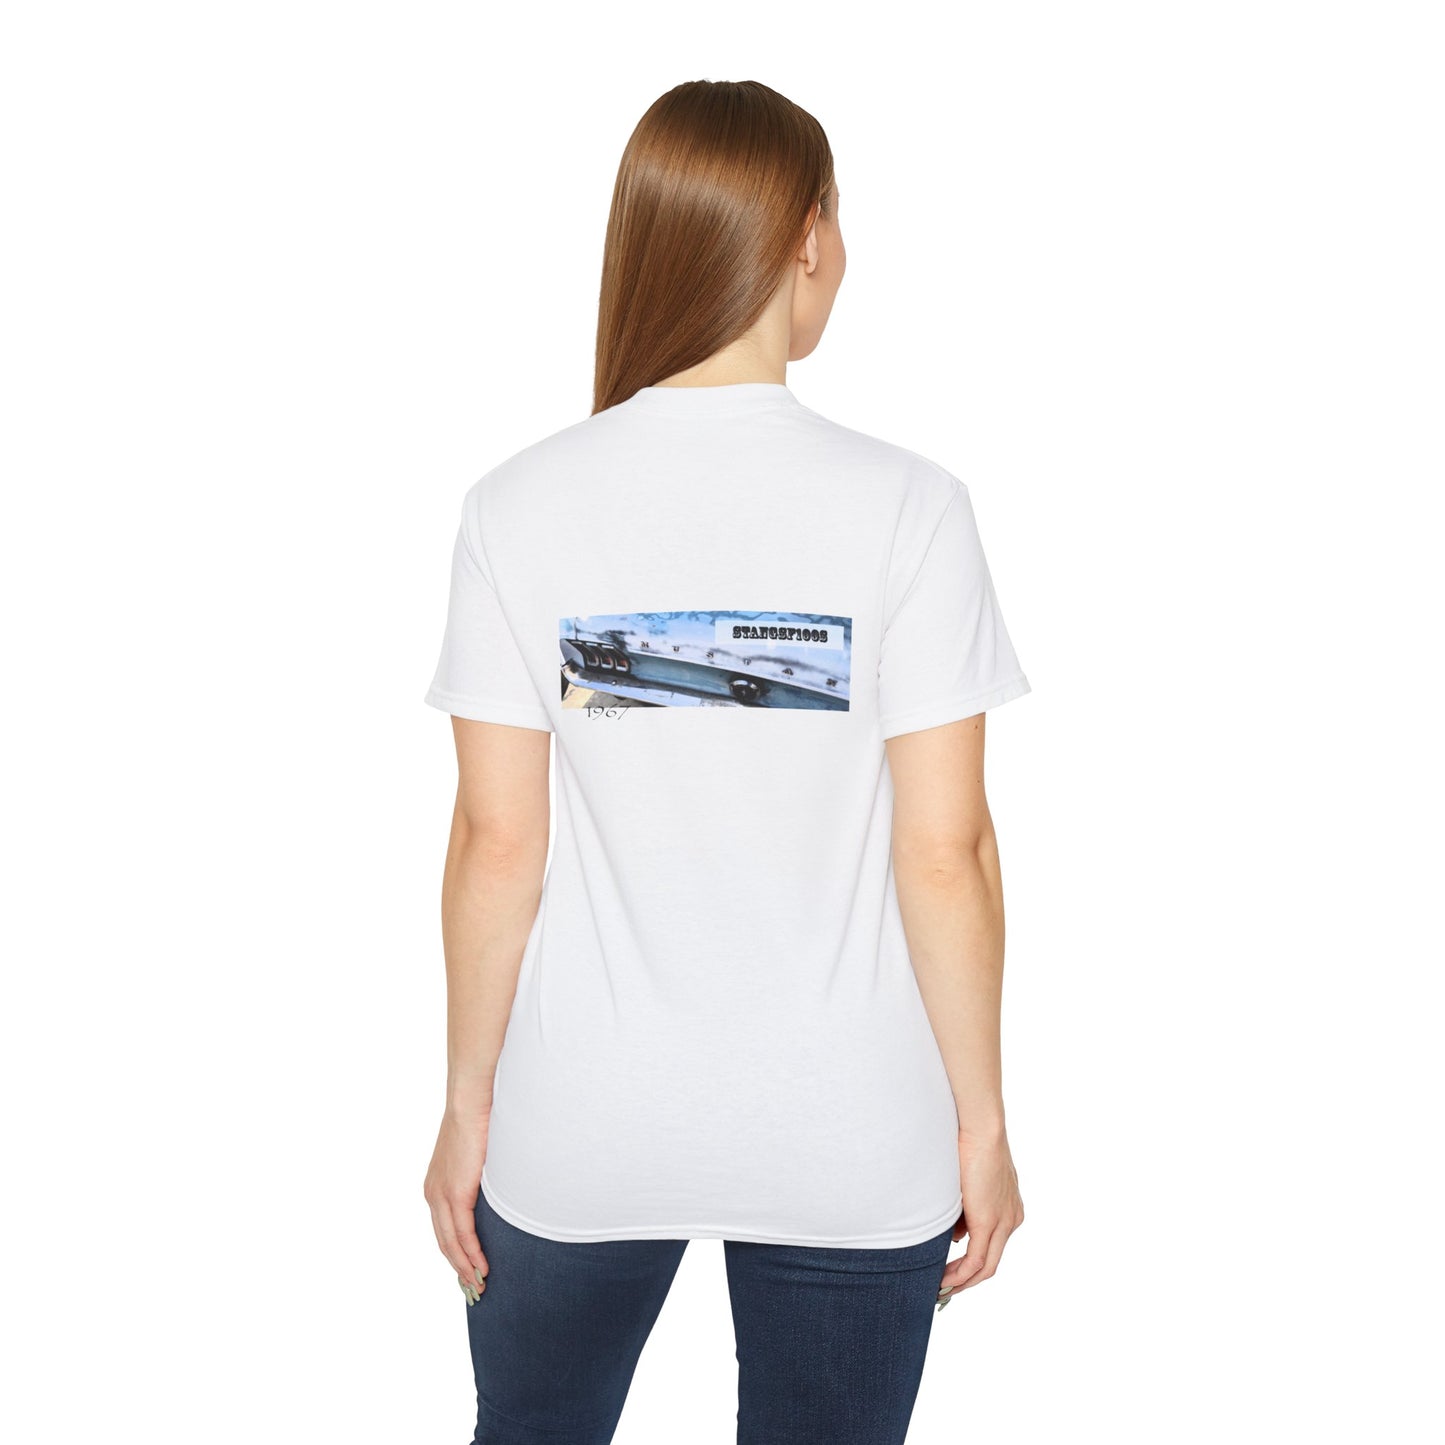 1967 Stang Classic on Back Unisex Ultra Cotton Tee.